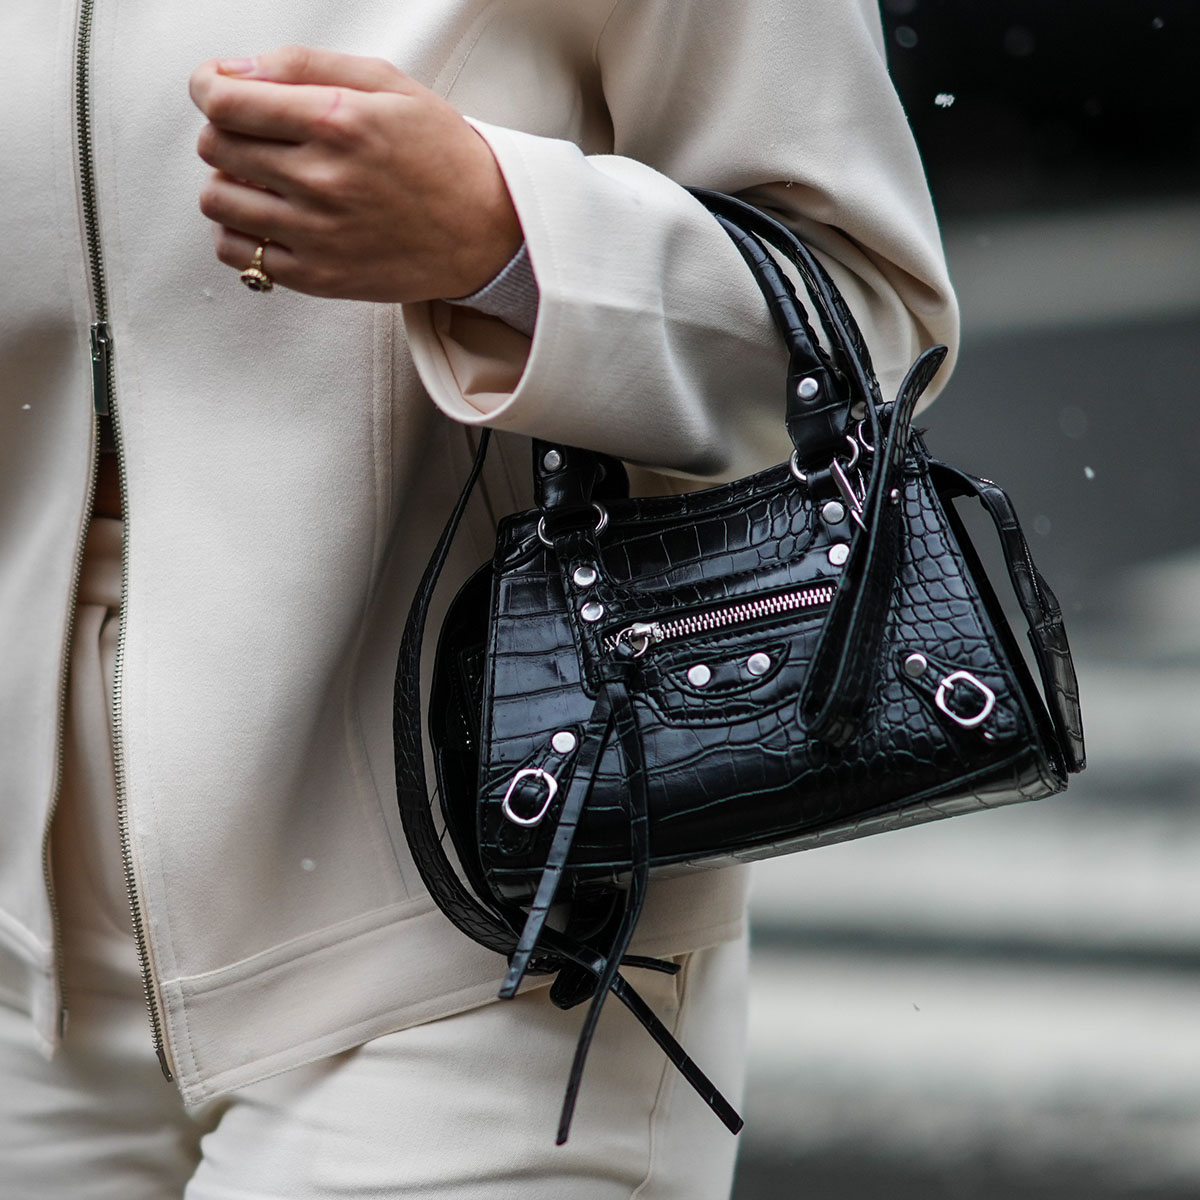 Balenciaga's City Reviewed: Is It Worth the Money? | What Wear